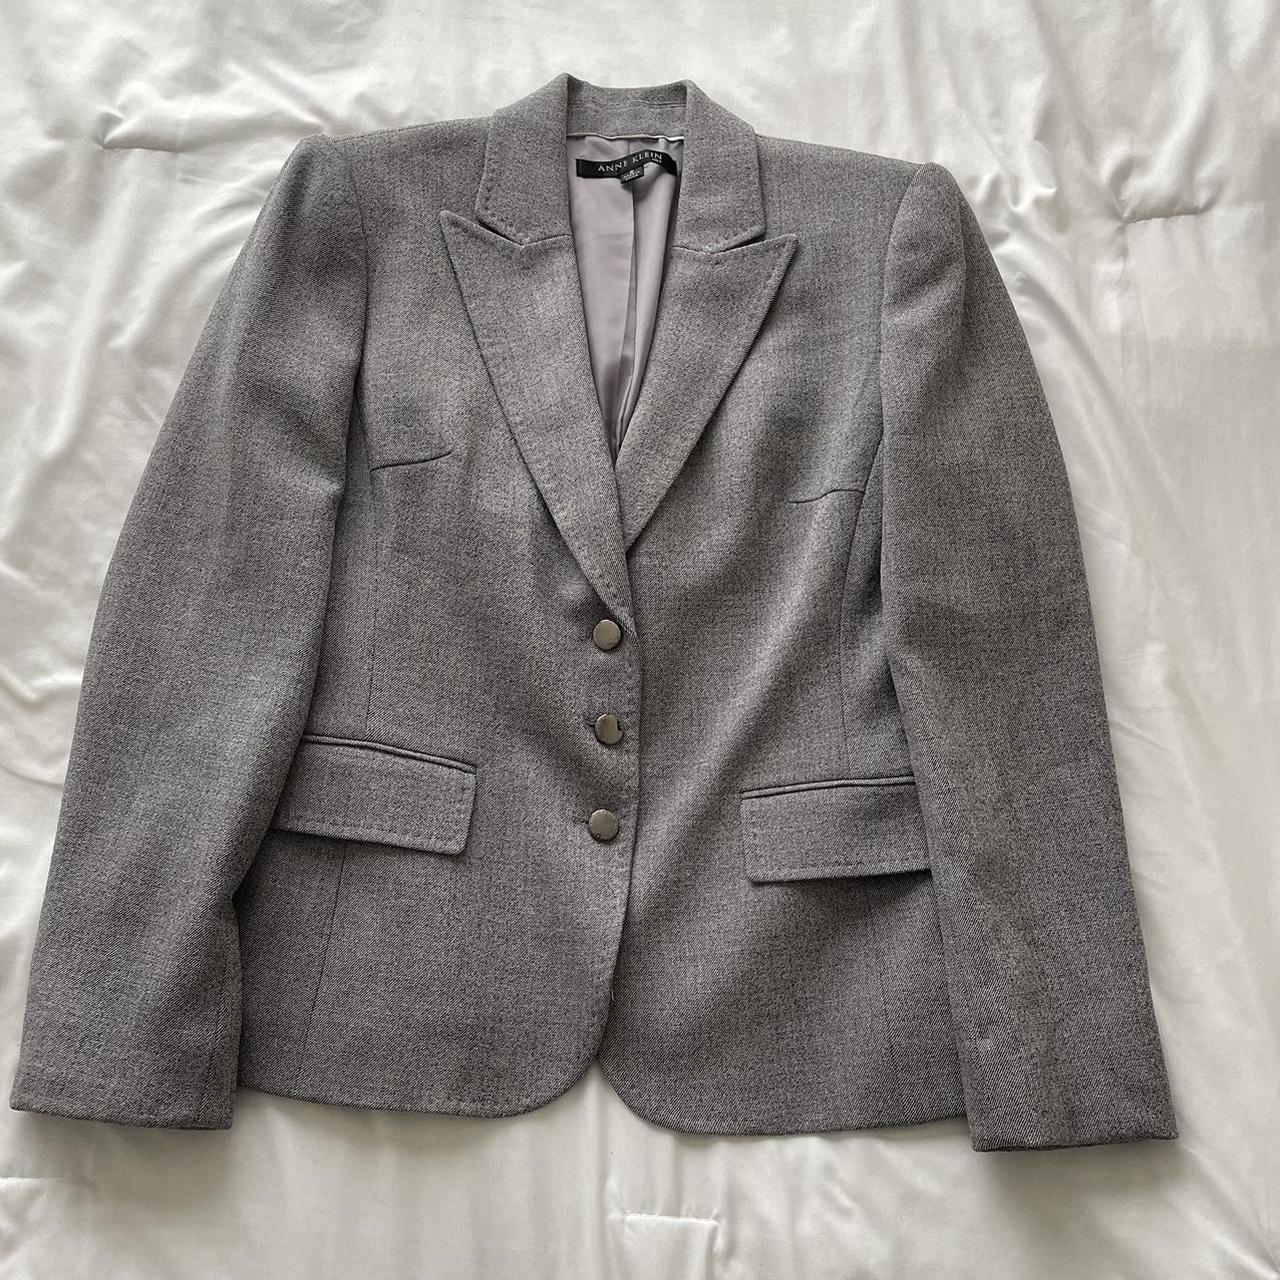 Anne Klein Women's Grey and Silver Suit